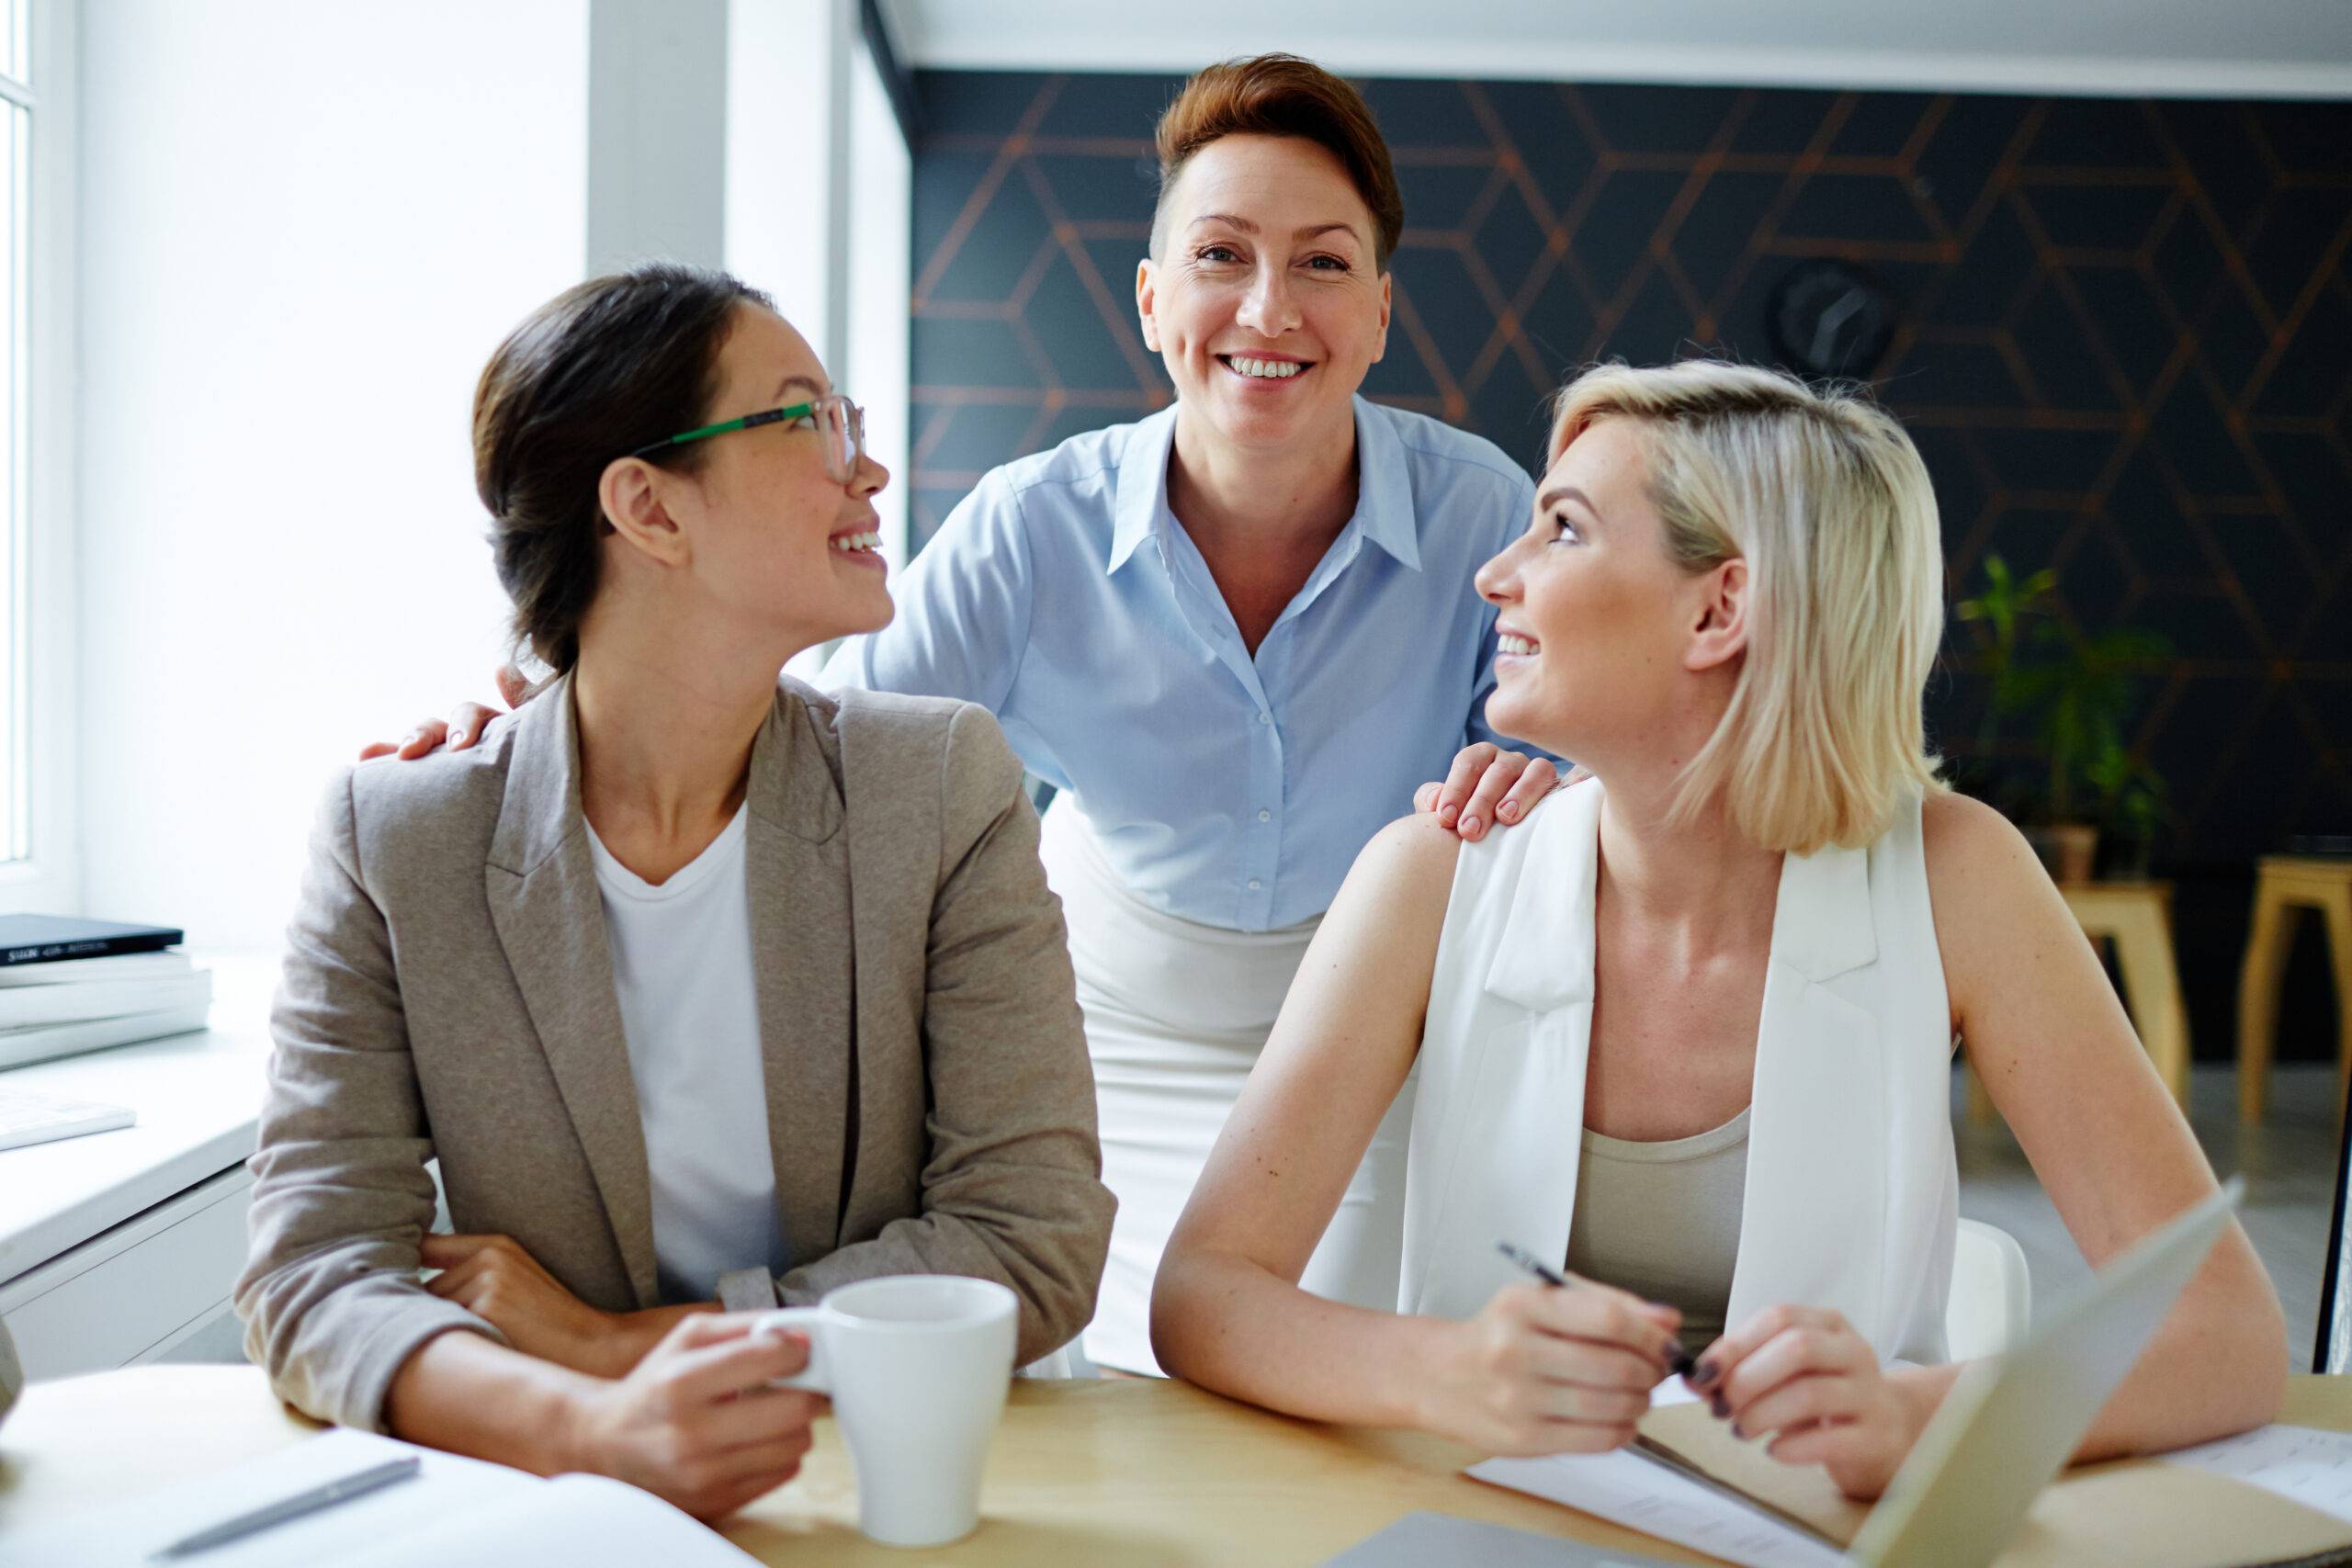 Woman with executive presence addressing two other business women over their shoulders.